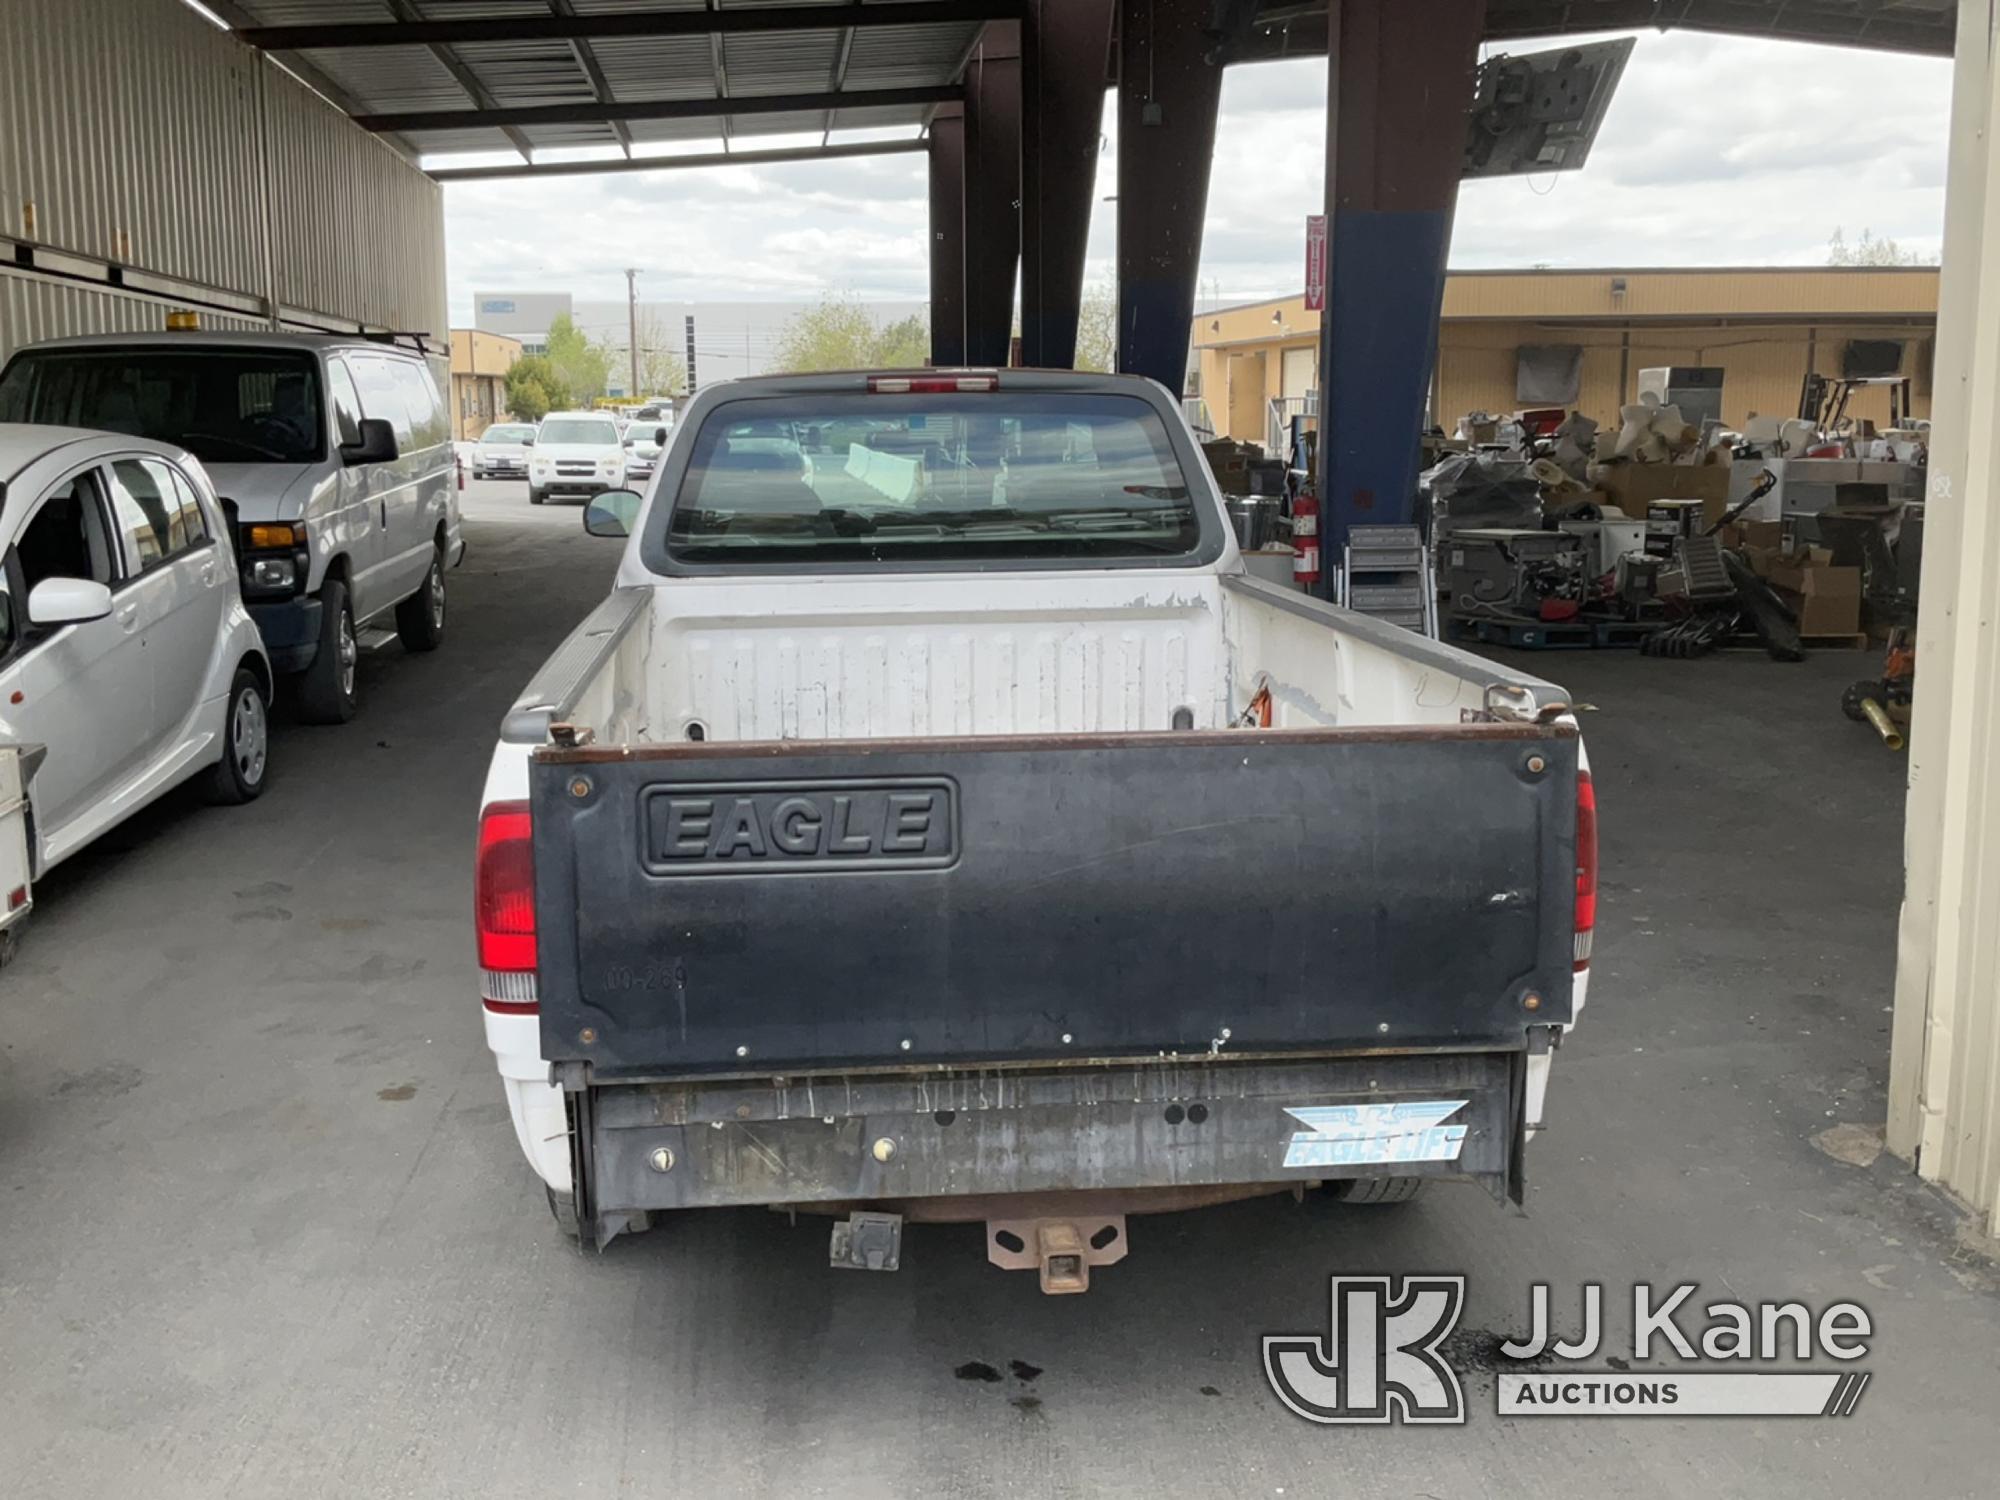 (Jurupa Valley, CA) 2000 Ford F-150 Extended-Cab Pickup Truck Runs & Moves, Paint Damage